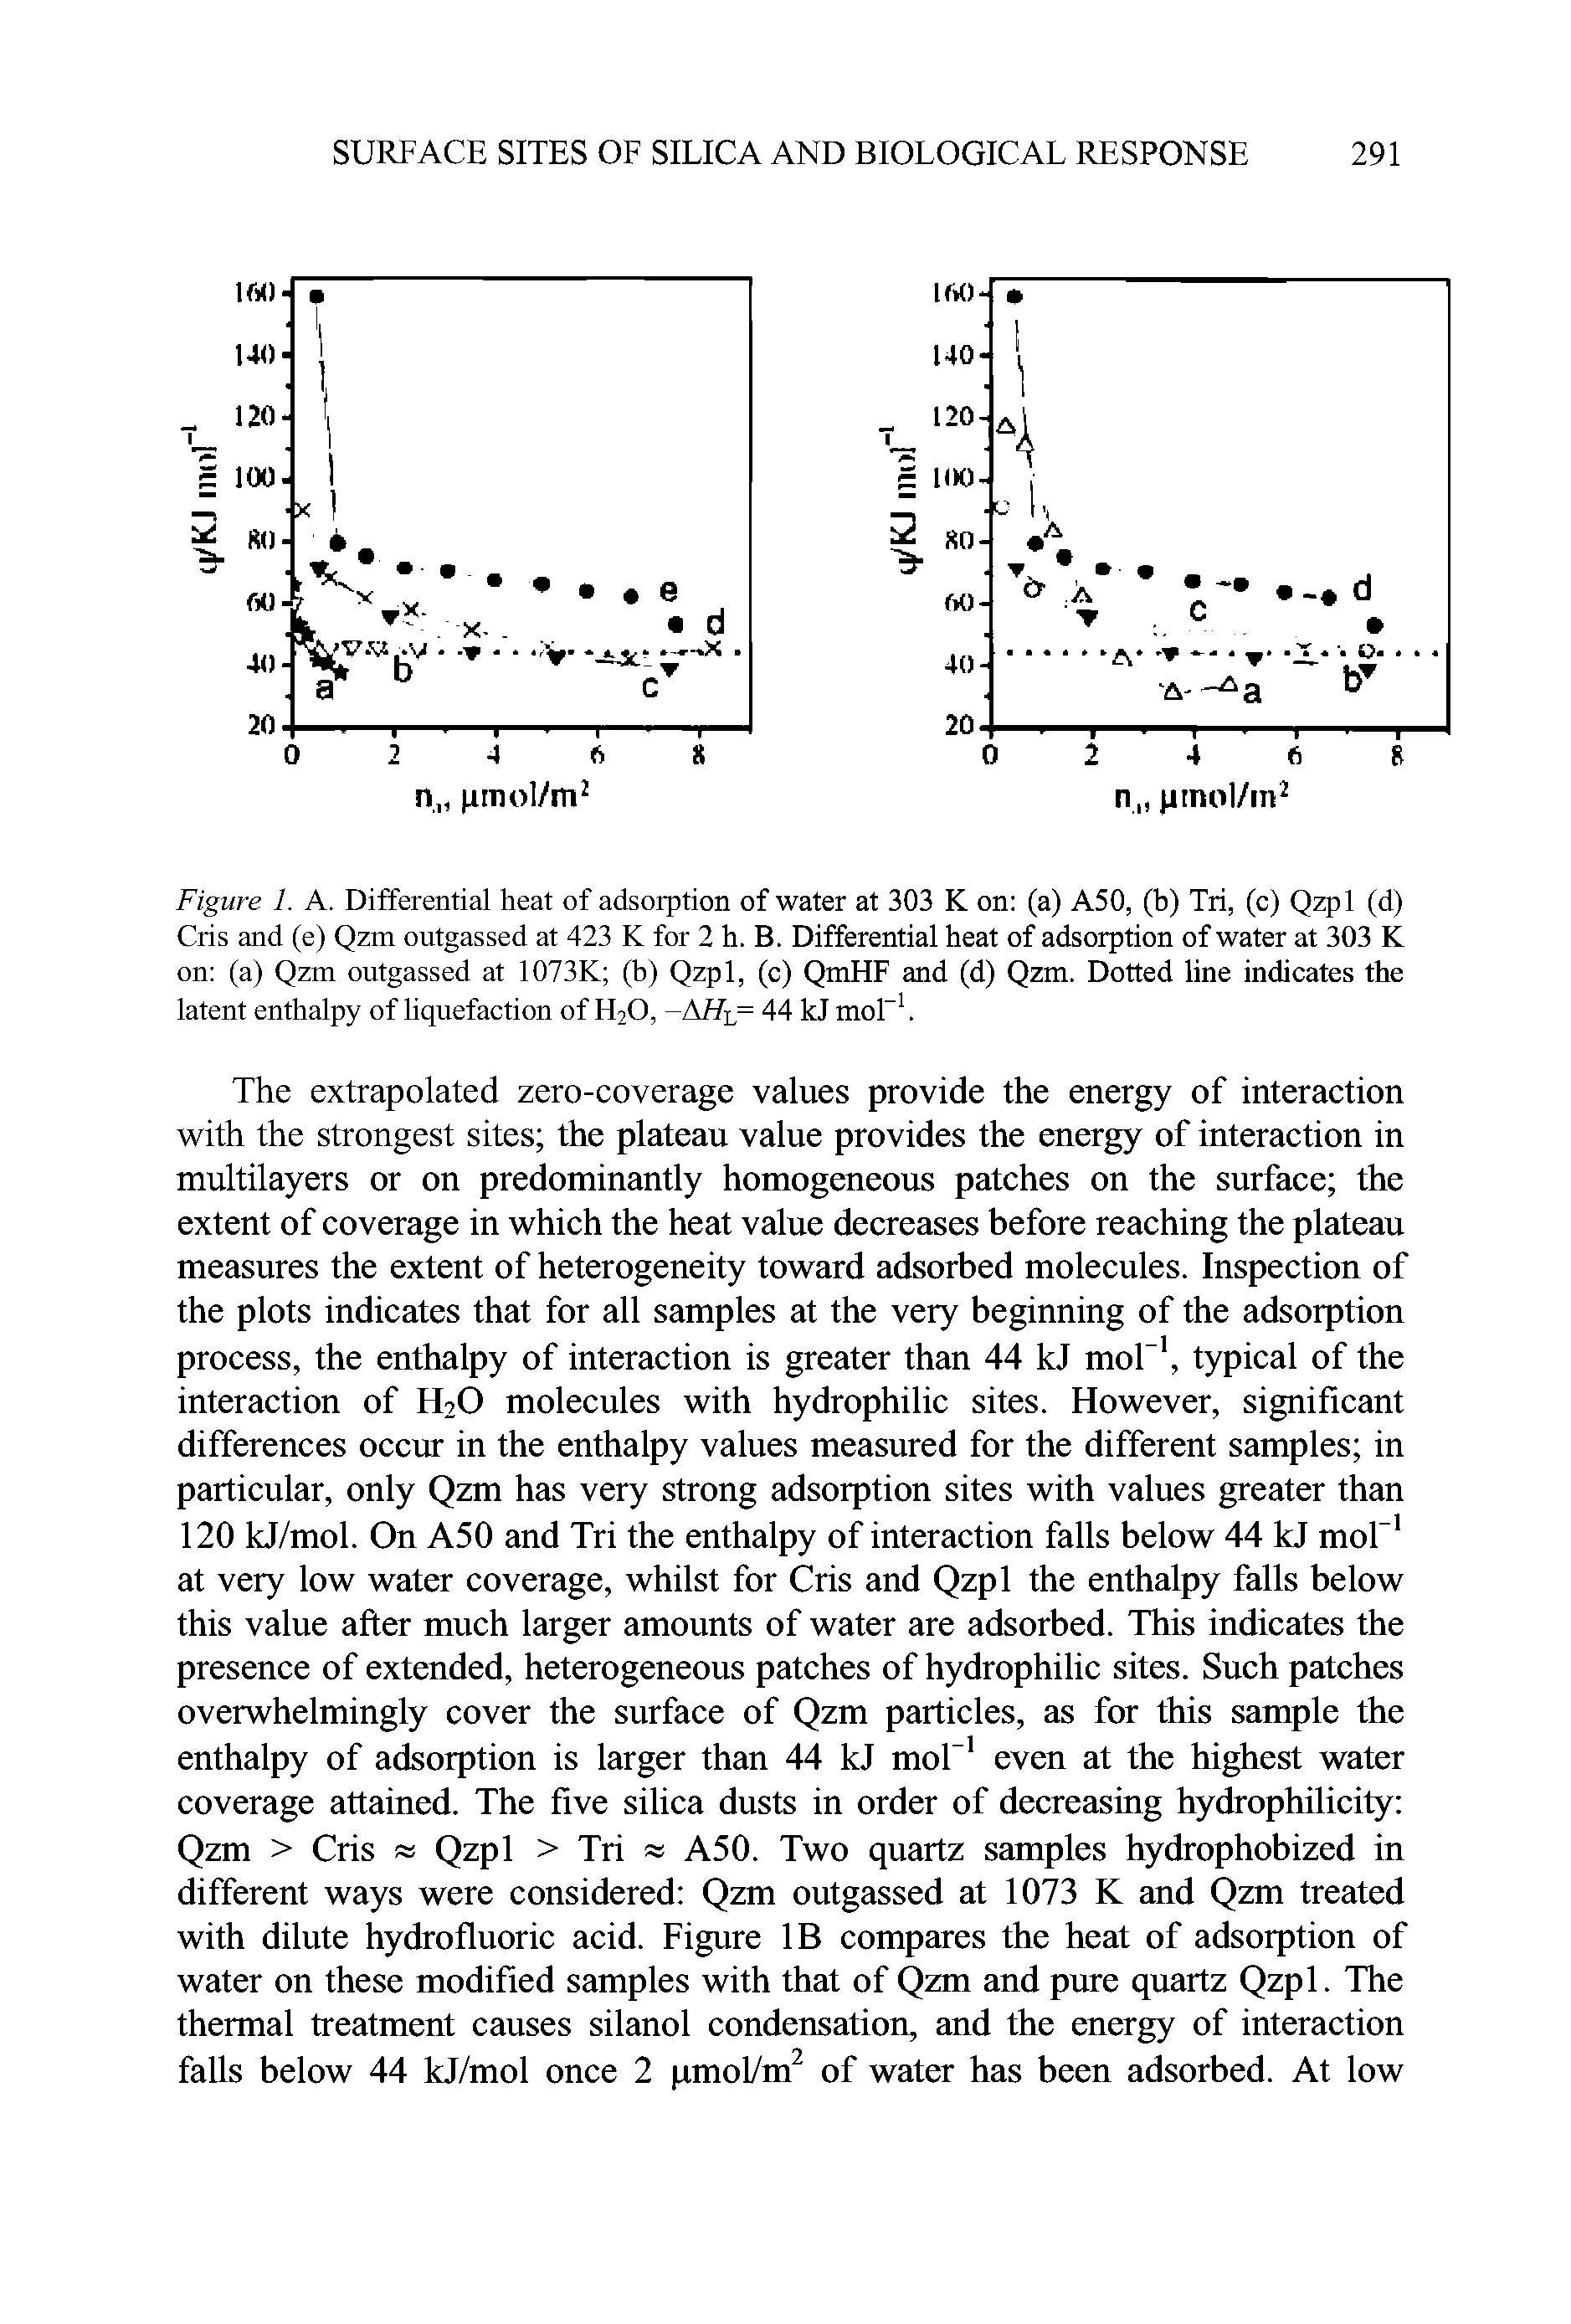 Figure 1. A. Differential heat of adsorption of water at 303 K on (a) A50, (b) Tri, (c) Qzpl (d) Cris and (e) Qzm outgassed at 423 K for 2 h. B. Differential heat of adsorption of water at 303 K on (a) Qzm outgassed at 1073K (b) Qzpl, (c) QmHF and (d) Qzm. Dotted line indicates the latent enthalpy of liquefaction of H20, -AHL= 44 kj mol-1.